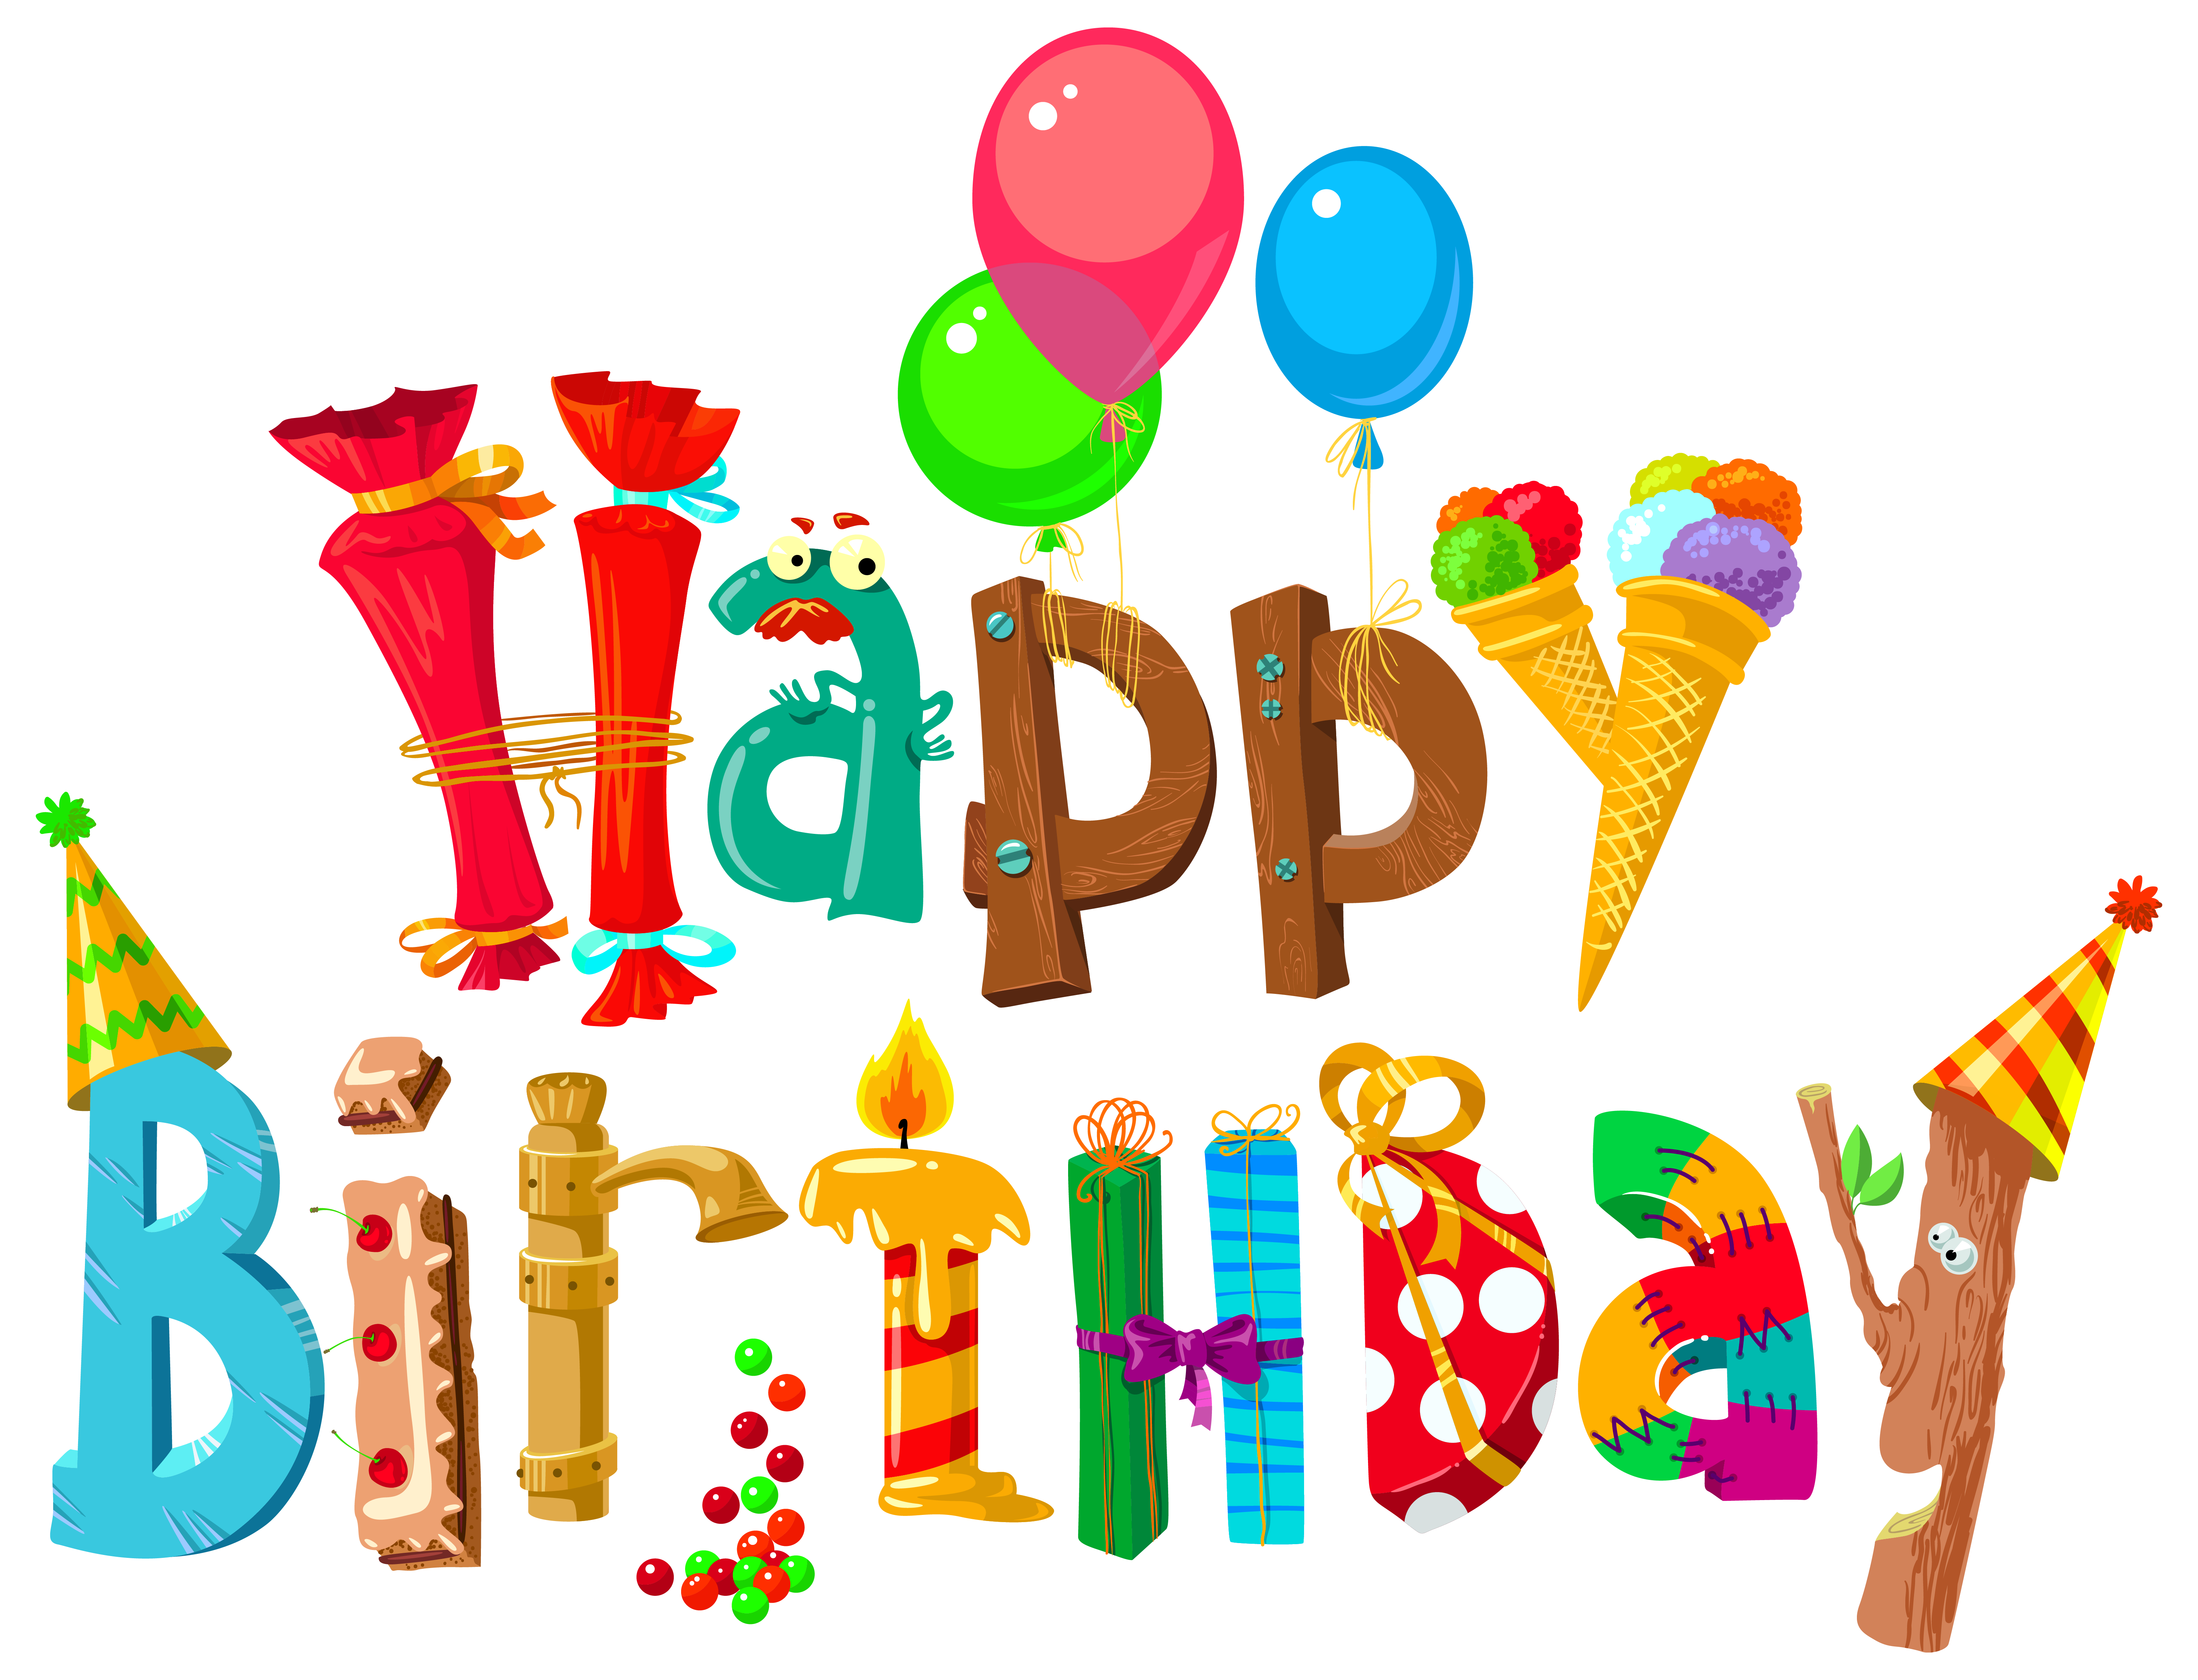 Uncle clipart papa. Funny happy birthday image